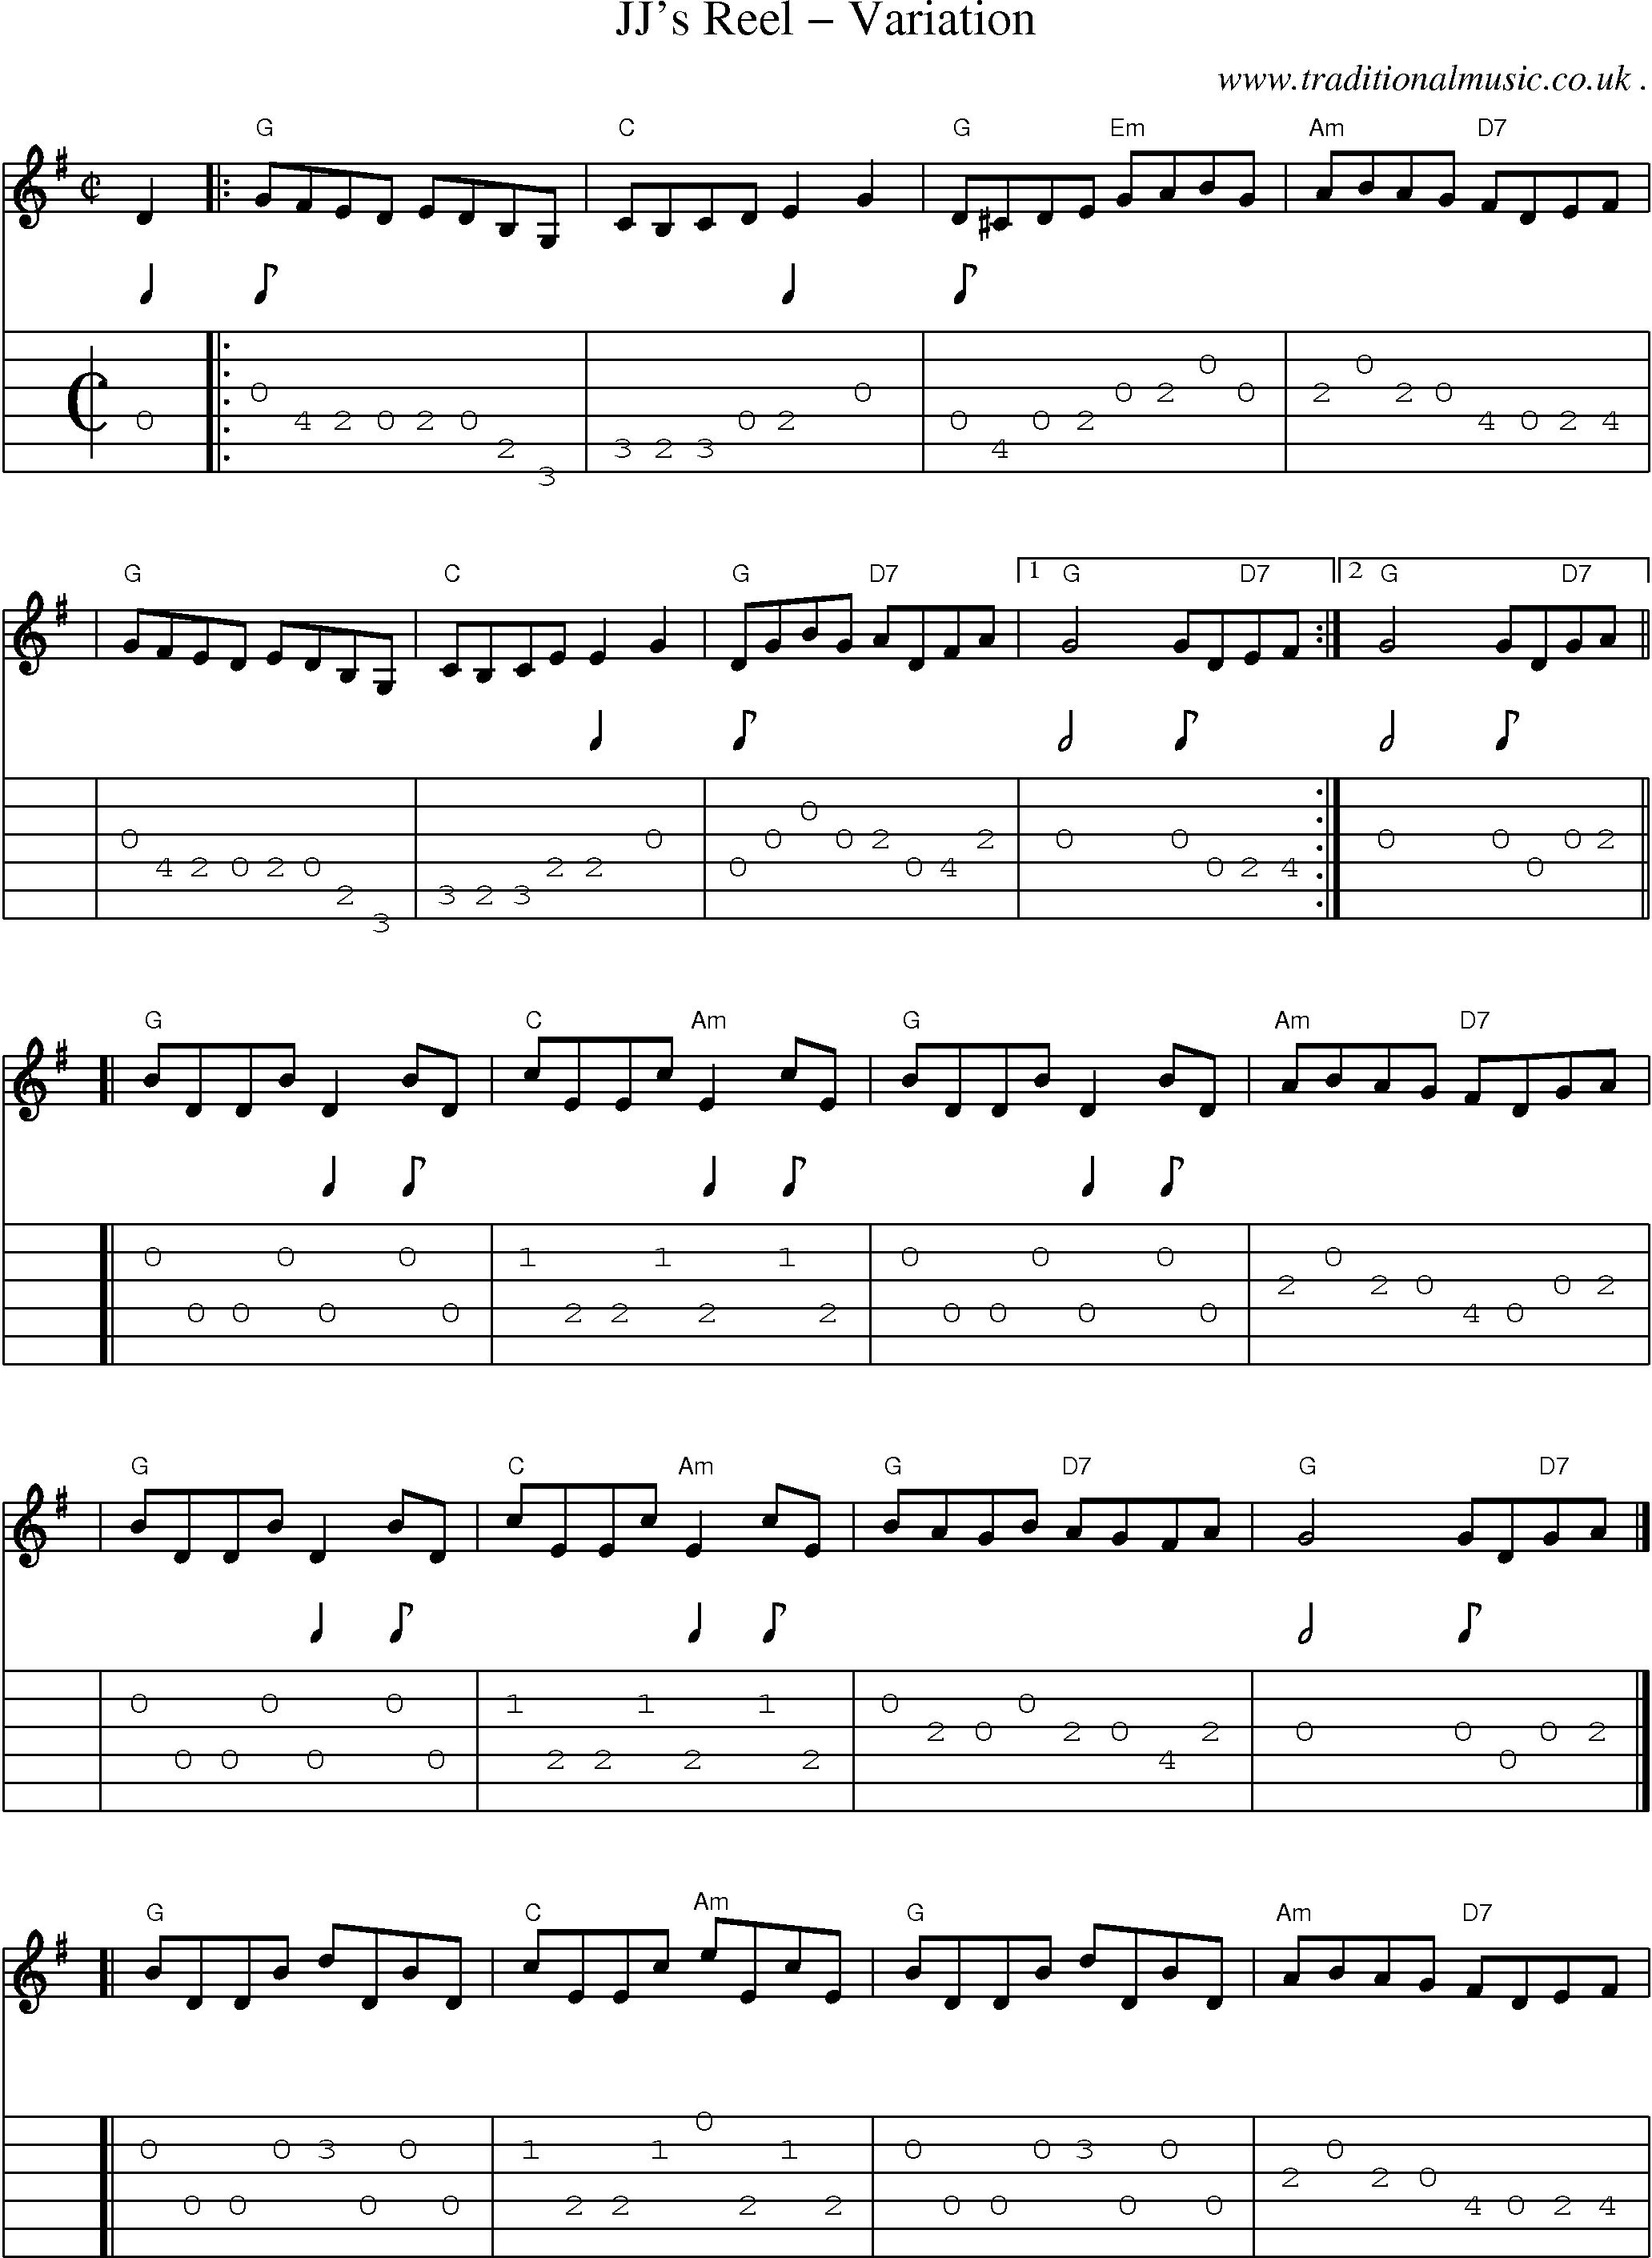 Sheet-music  score, Chords and Guitar Tabs for Jjs Reel Variation